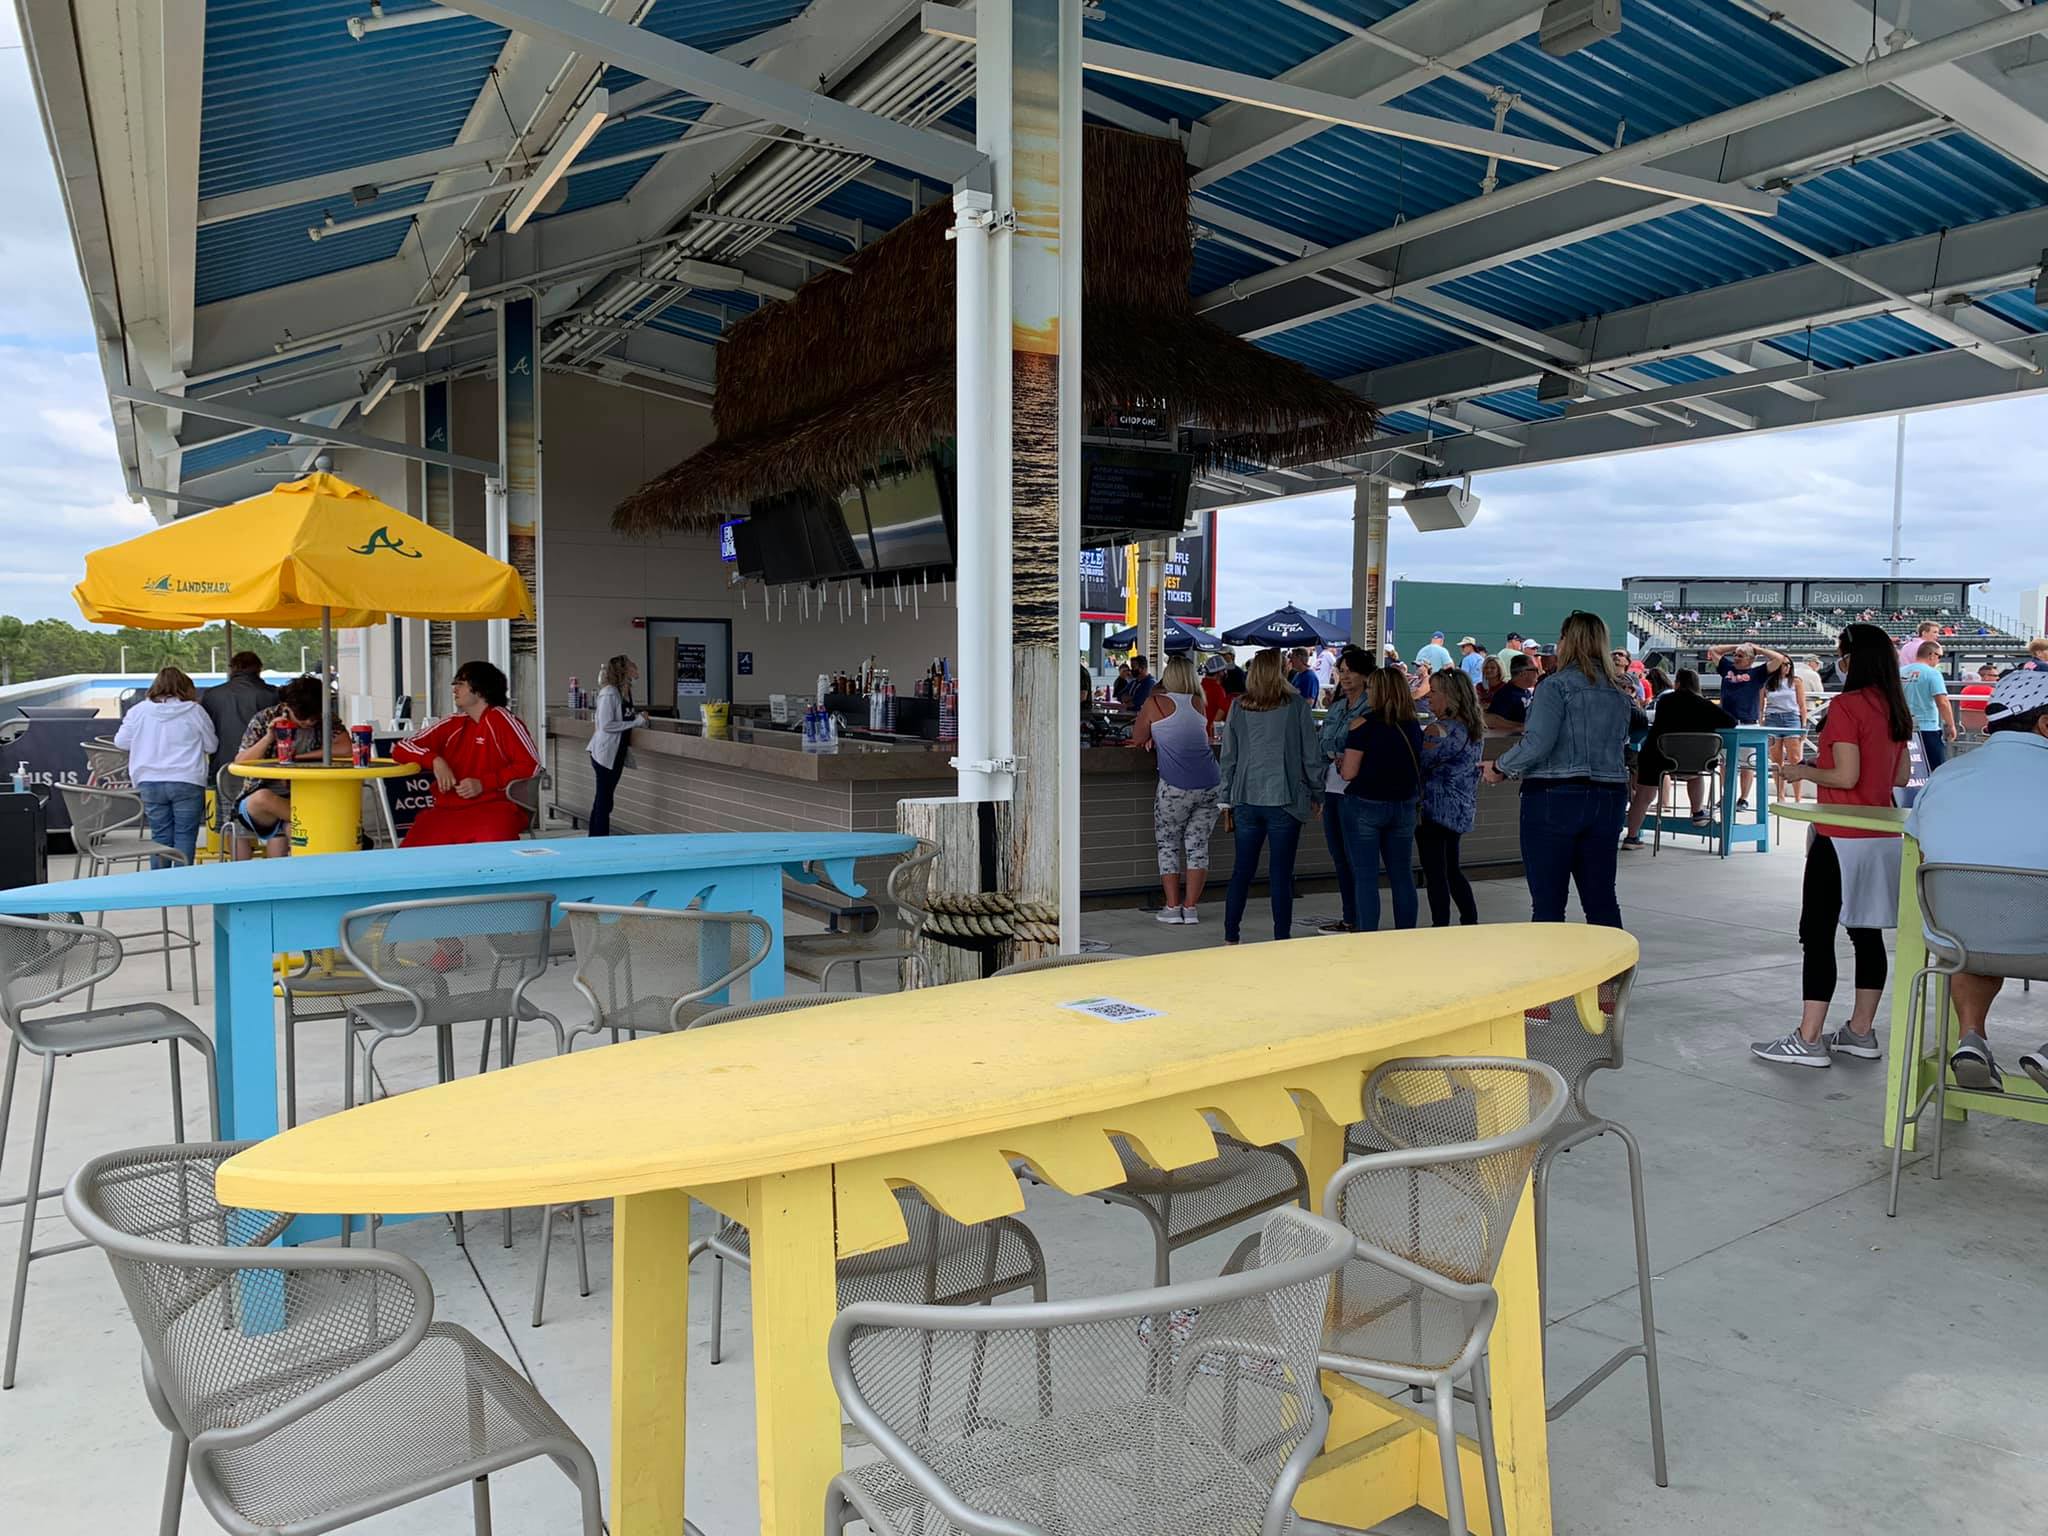 Also open on non-game days, CoolToday Park's Tomahawk Tiki Bar is one of the best amenities in the Grapefruit League.